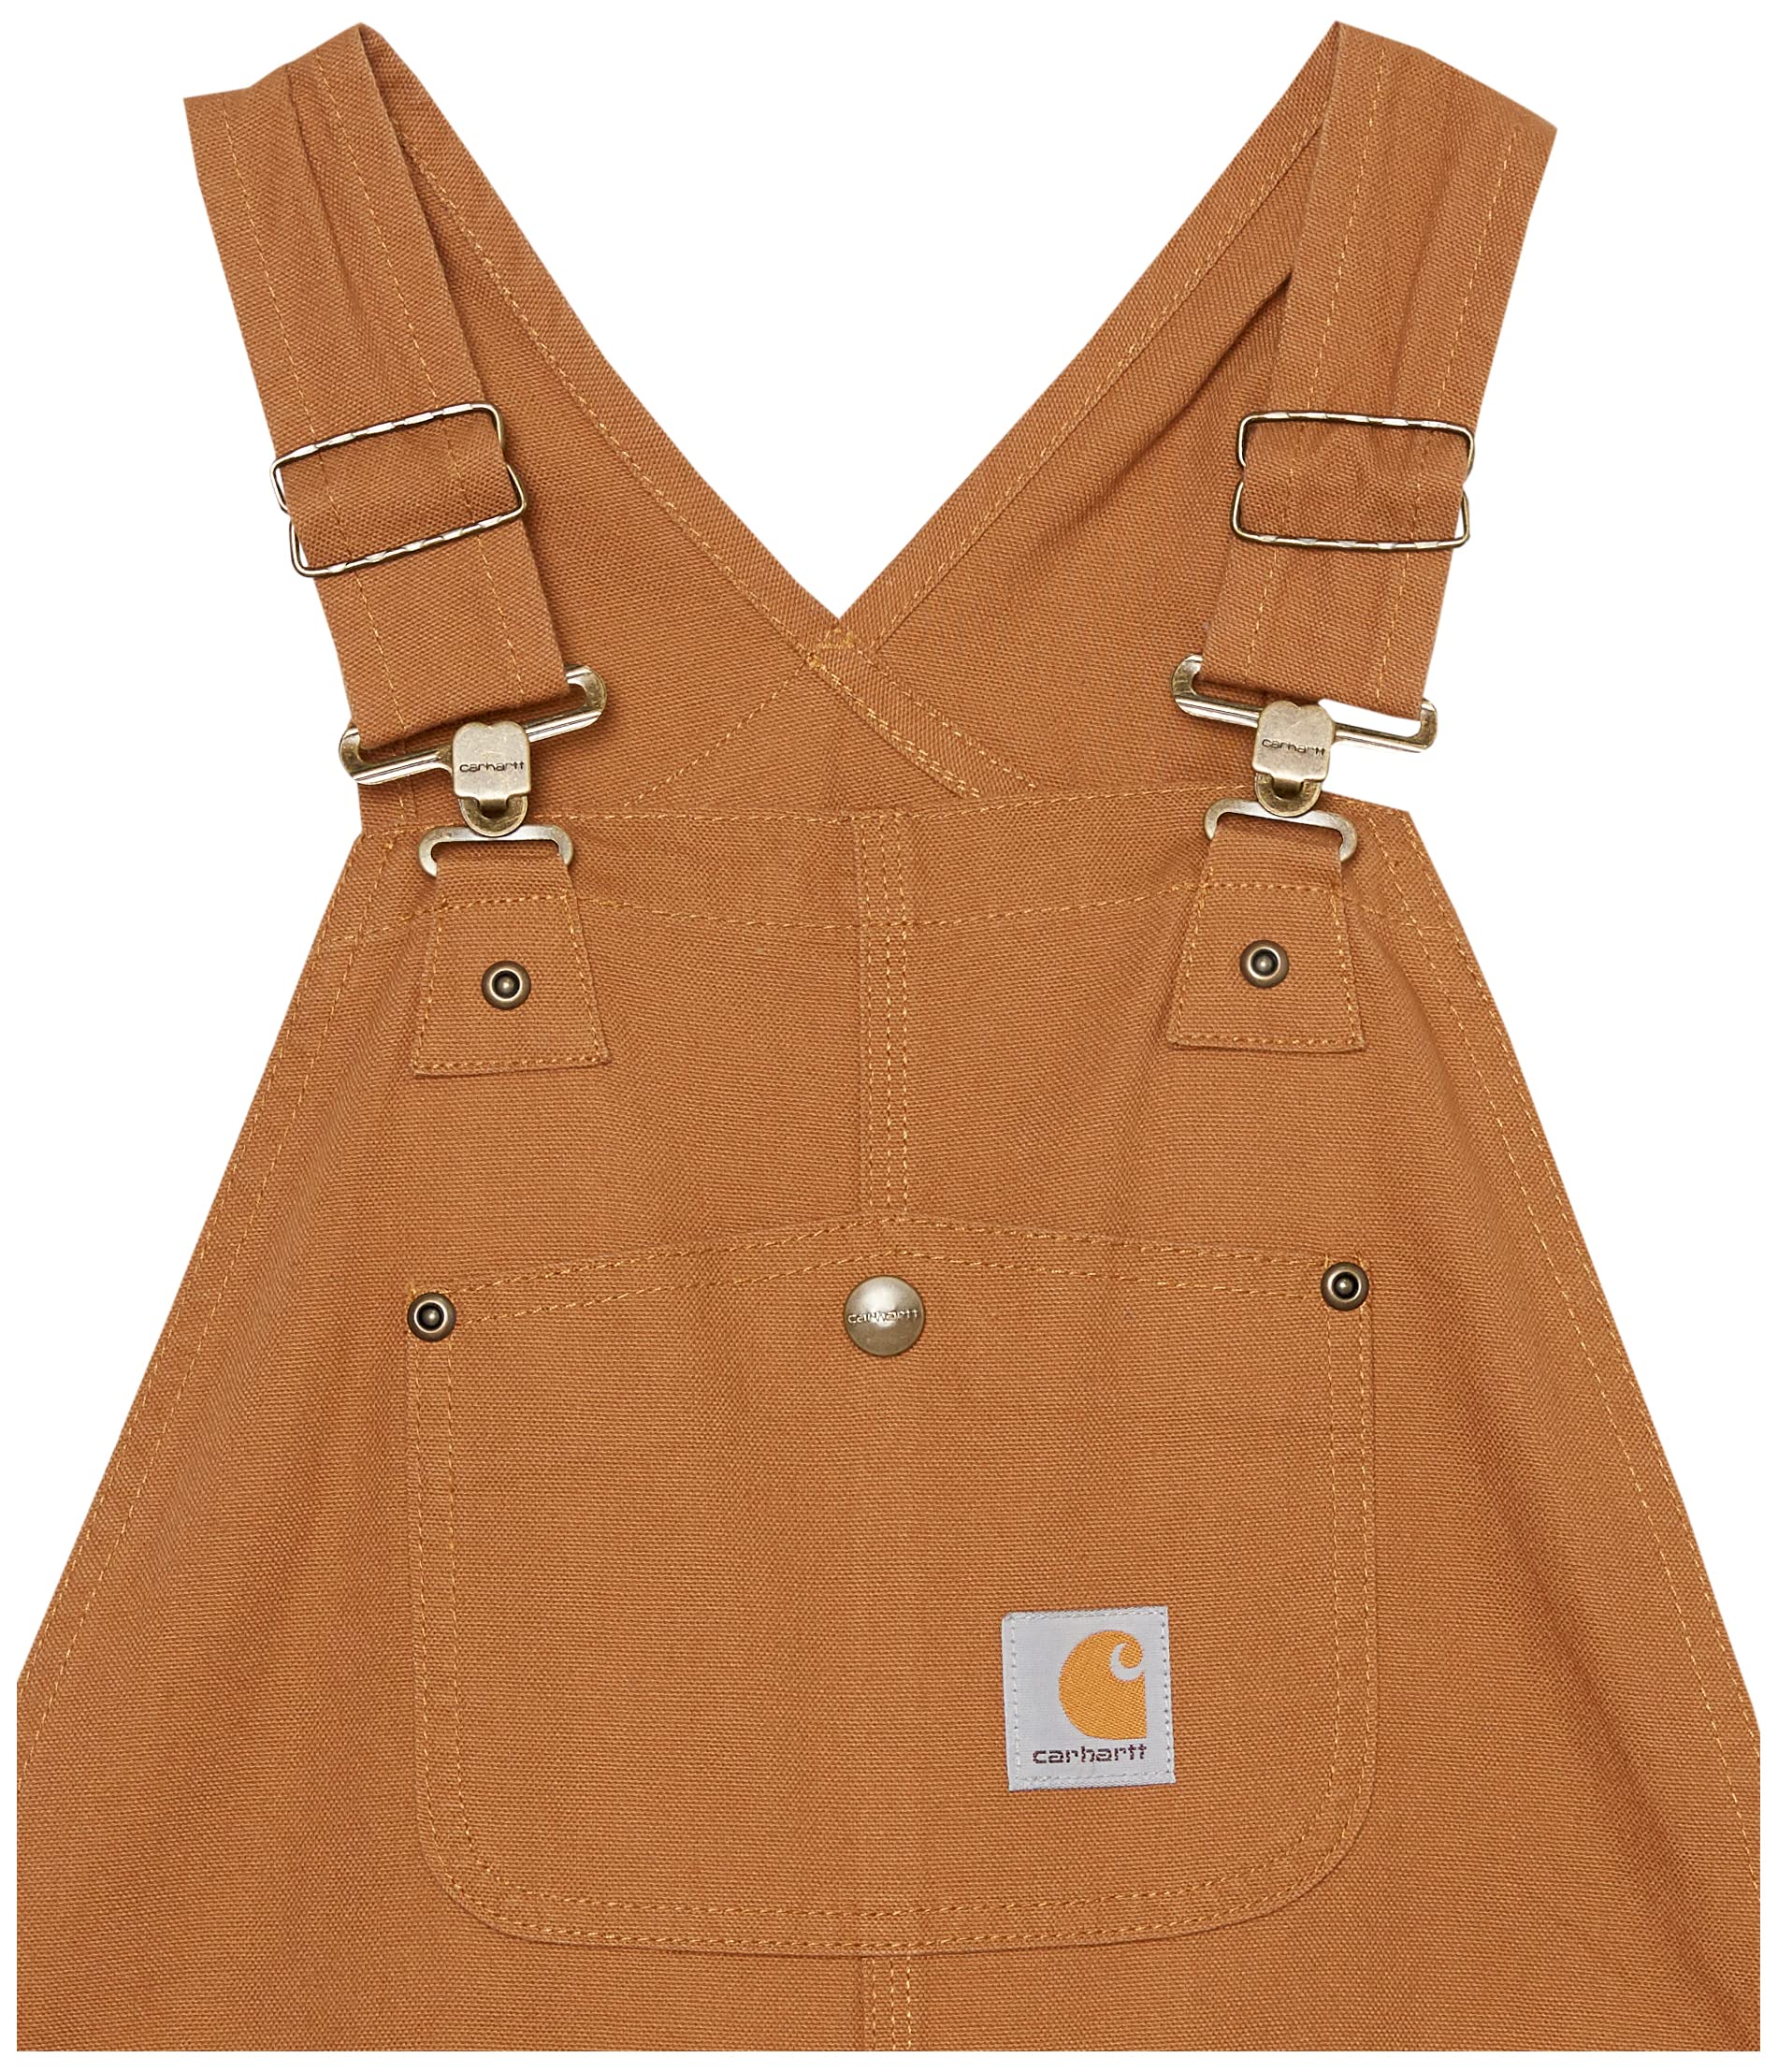 Carhartt boys Bib Overalls (Lined and Unlined),Carhartt Brown, 8